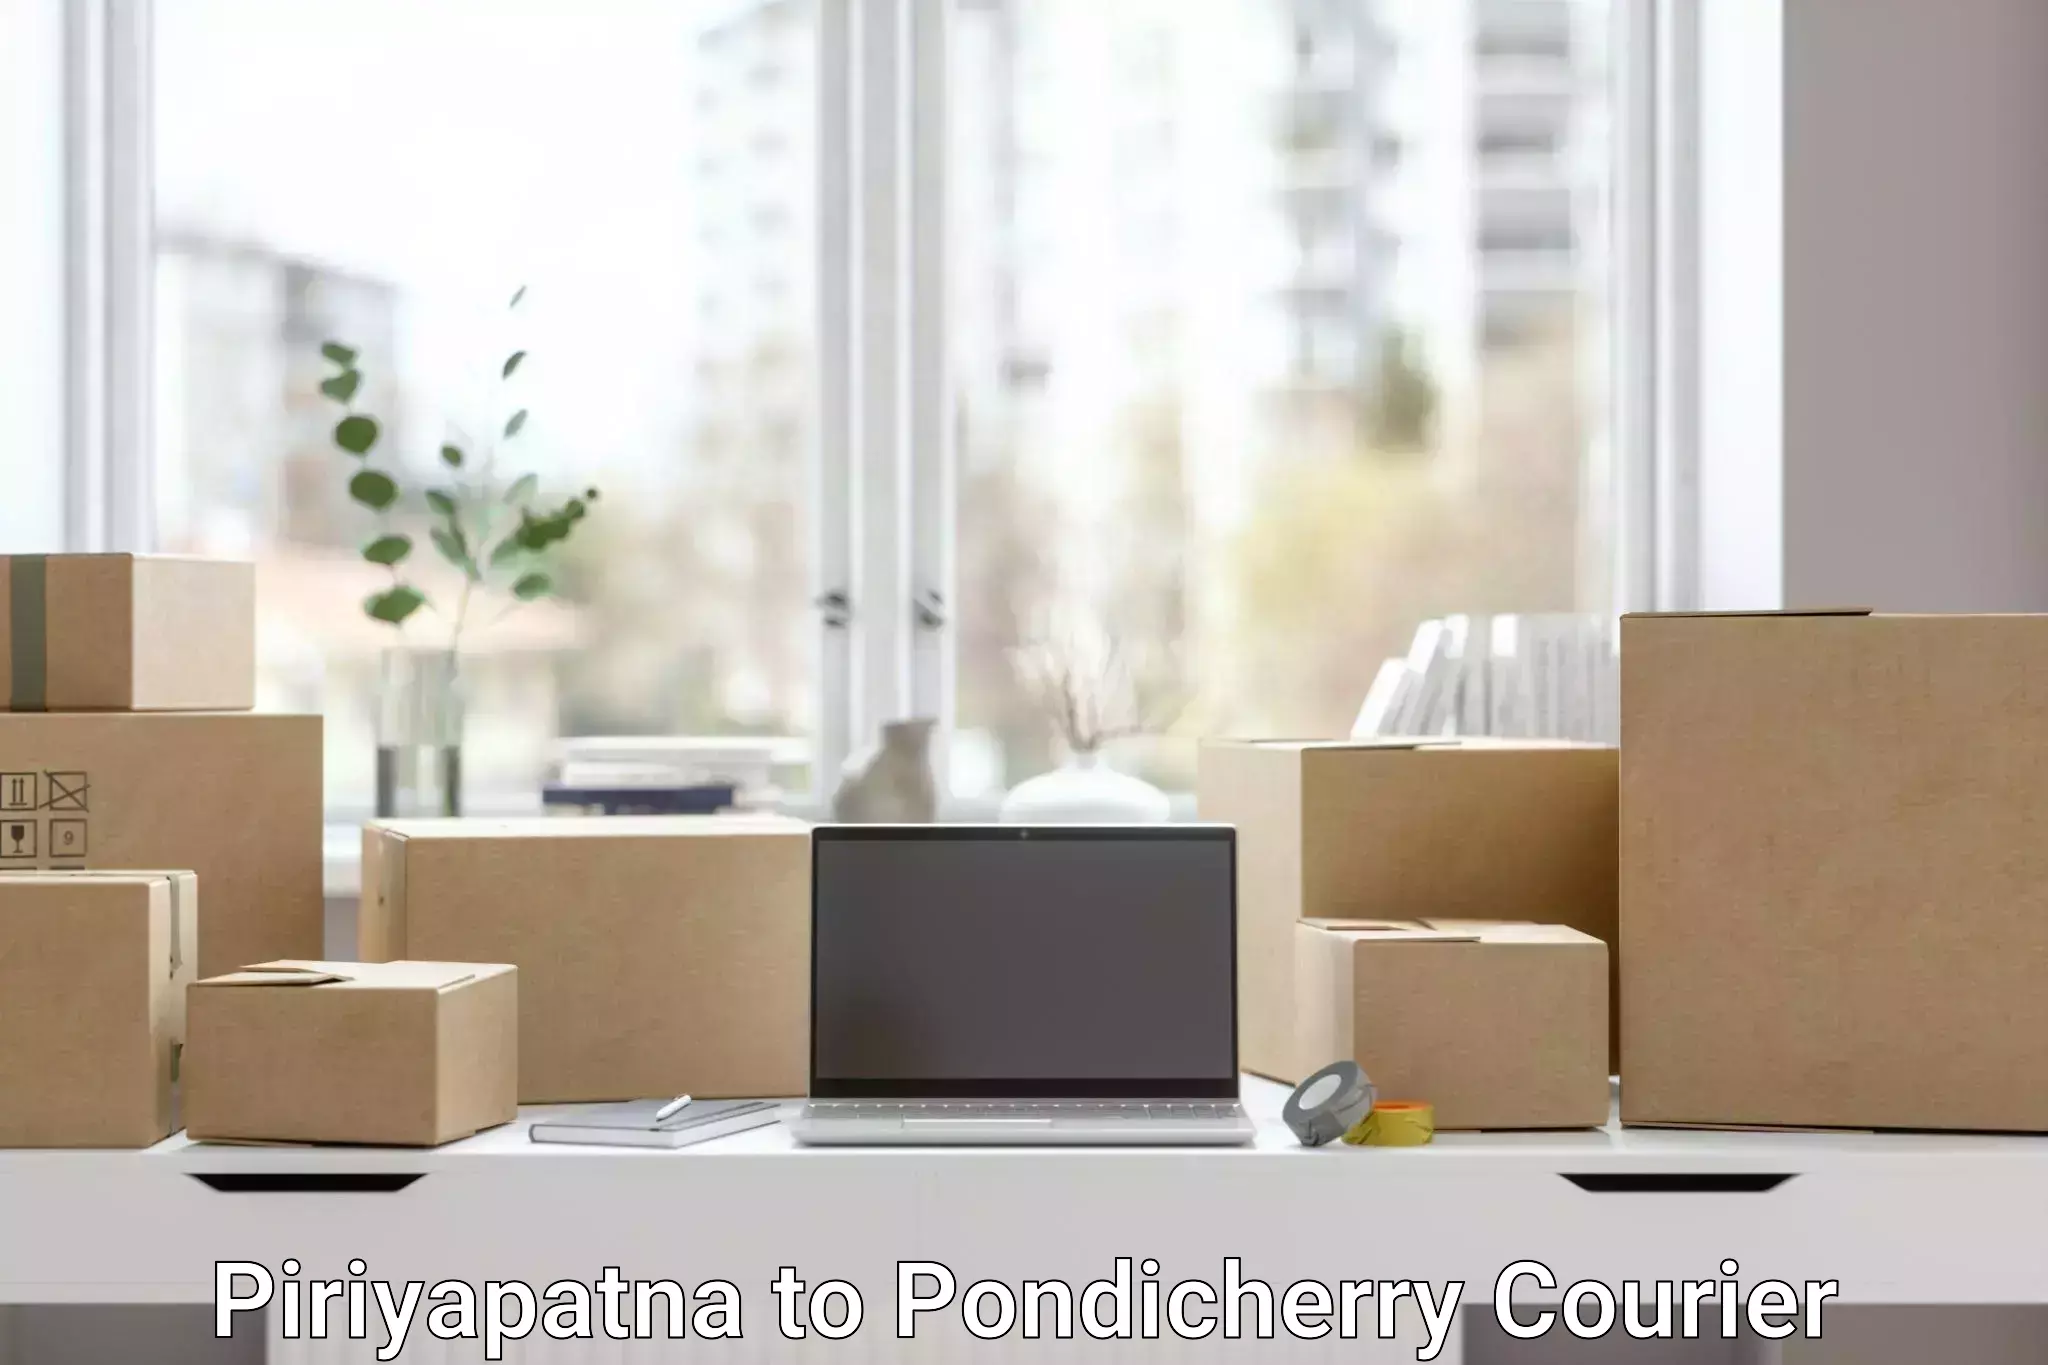 State-of-the-art courier technology Piriyapatna to Pondicherry